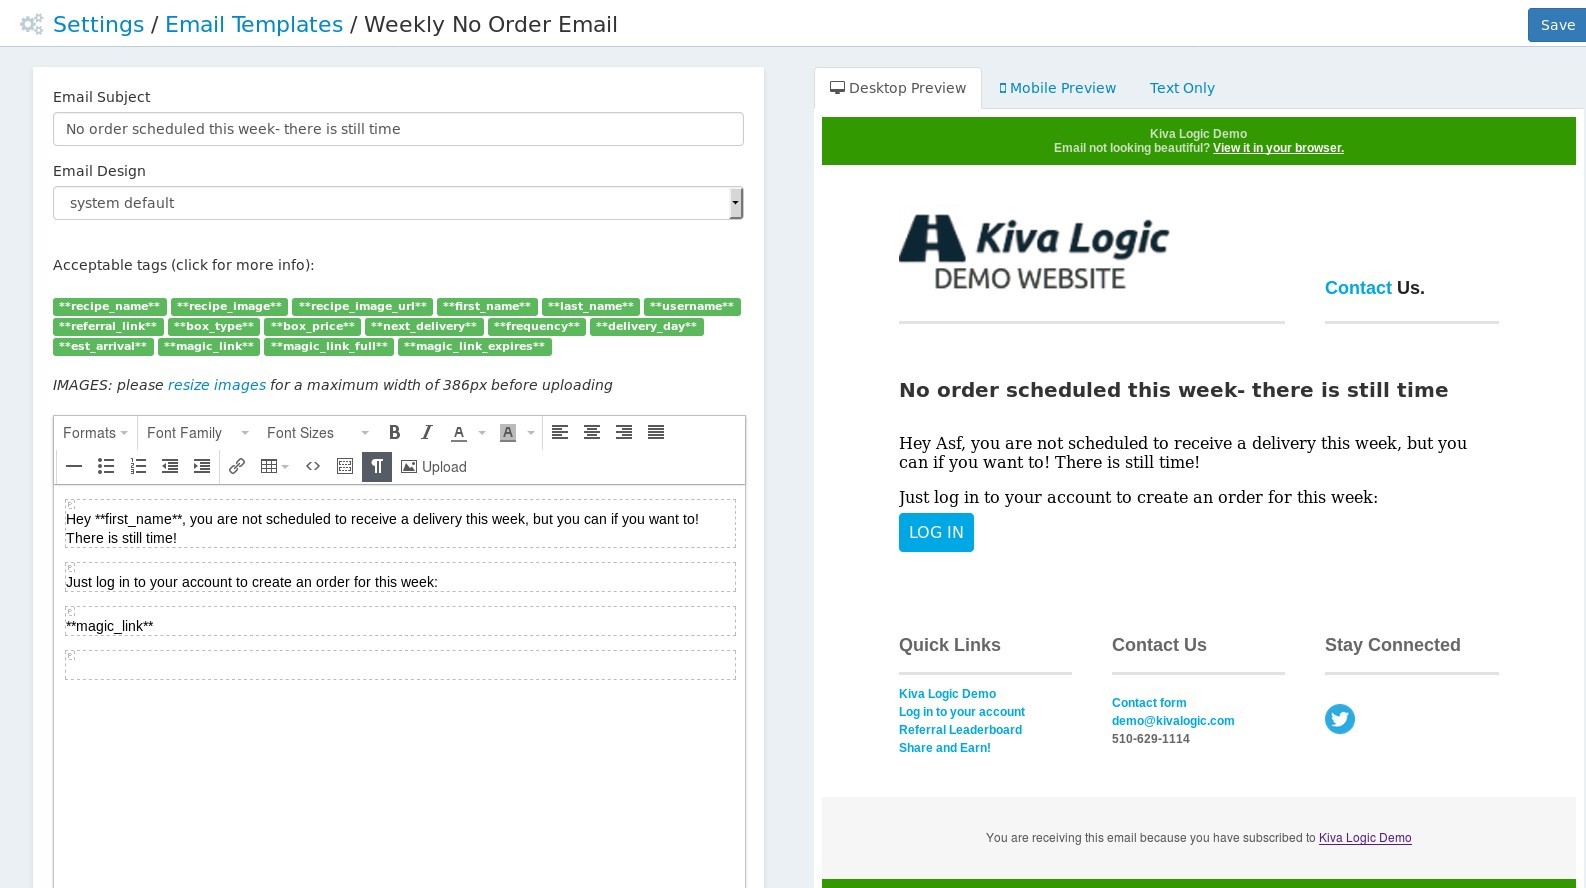 Weekly no order email template